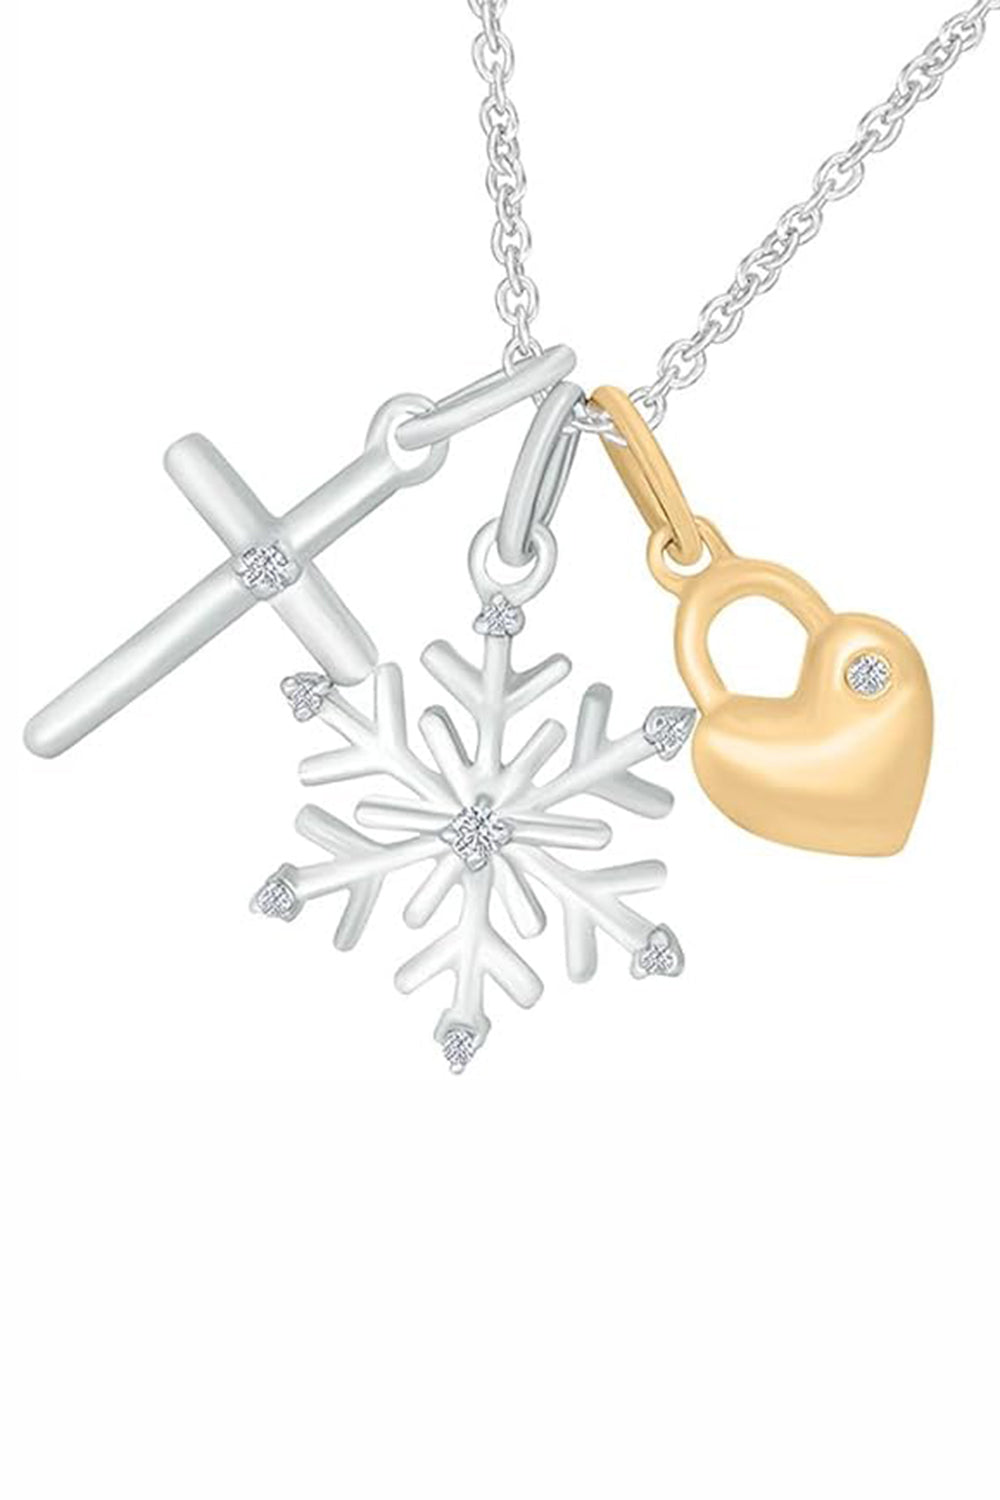 Moissanite Cross, Snowflake and Heart Lock Charms Pendant Necklace in 18k Two tone Gold Plated Sterling Silver.